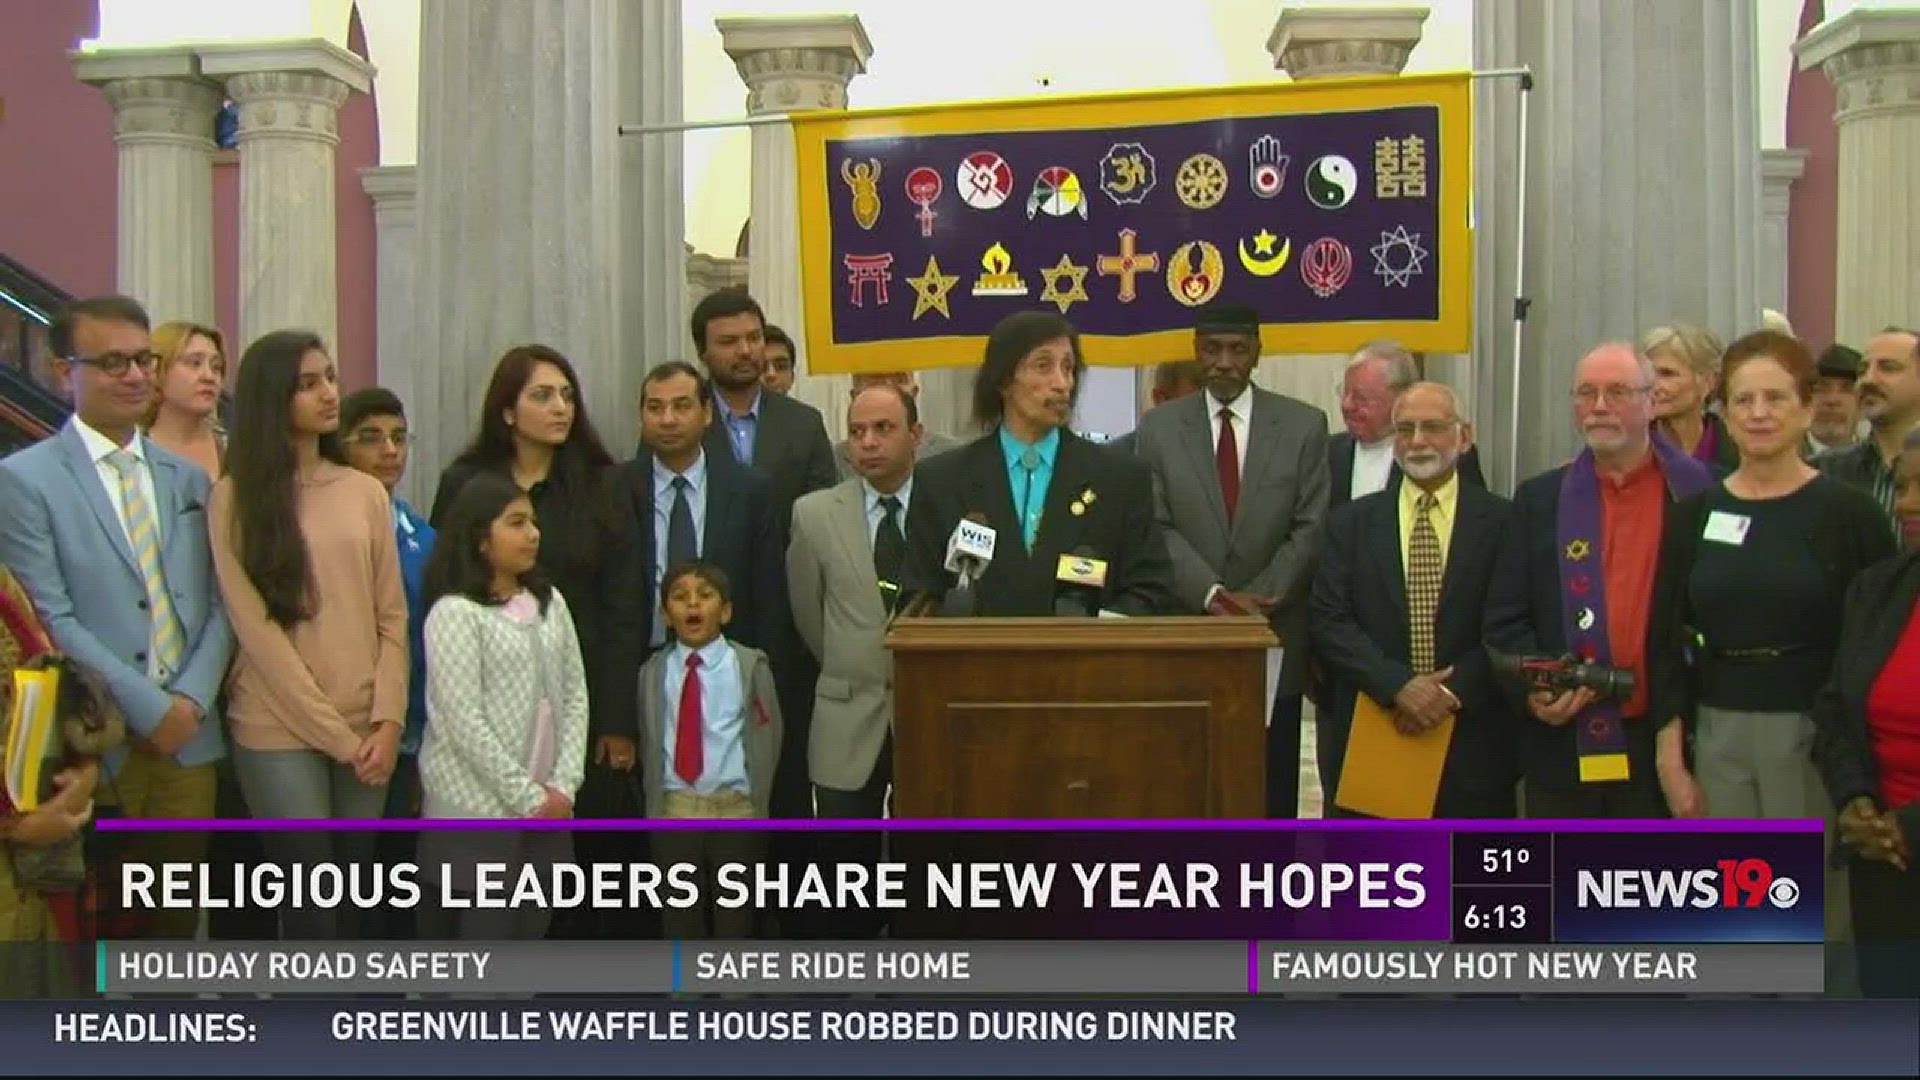 The religious leaders say the new year has to be about unity and love.